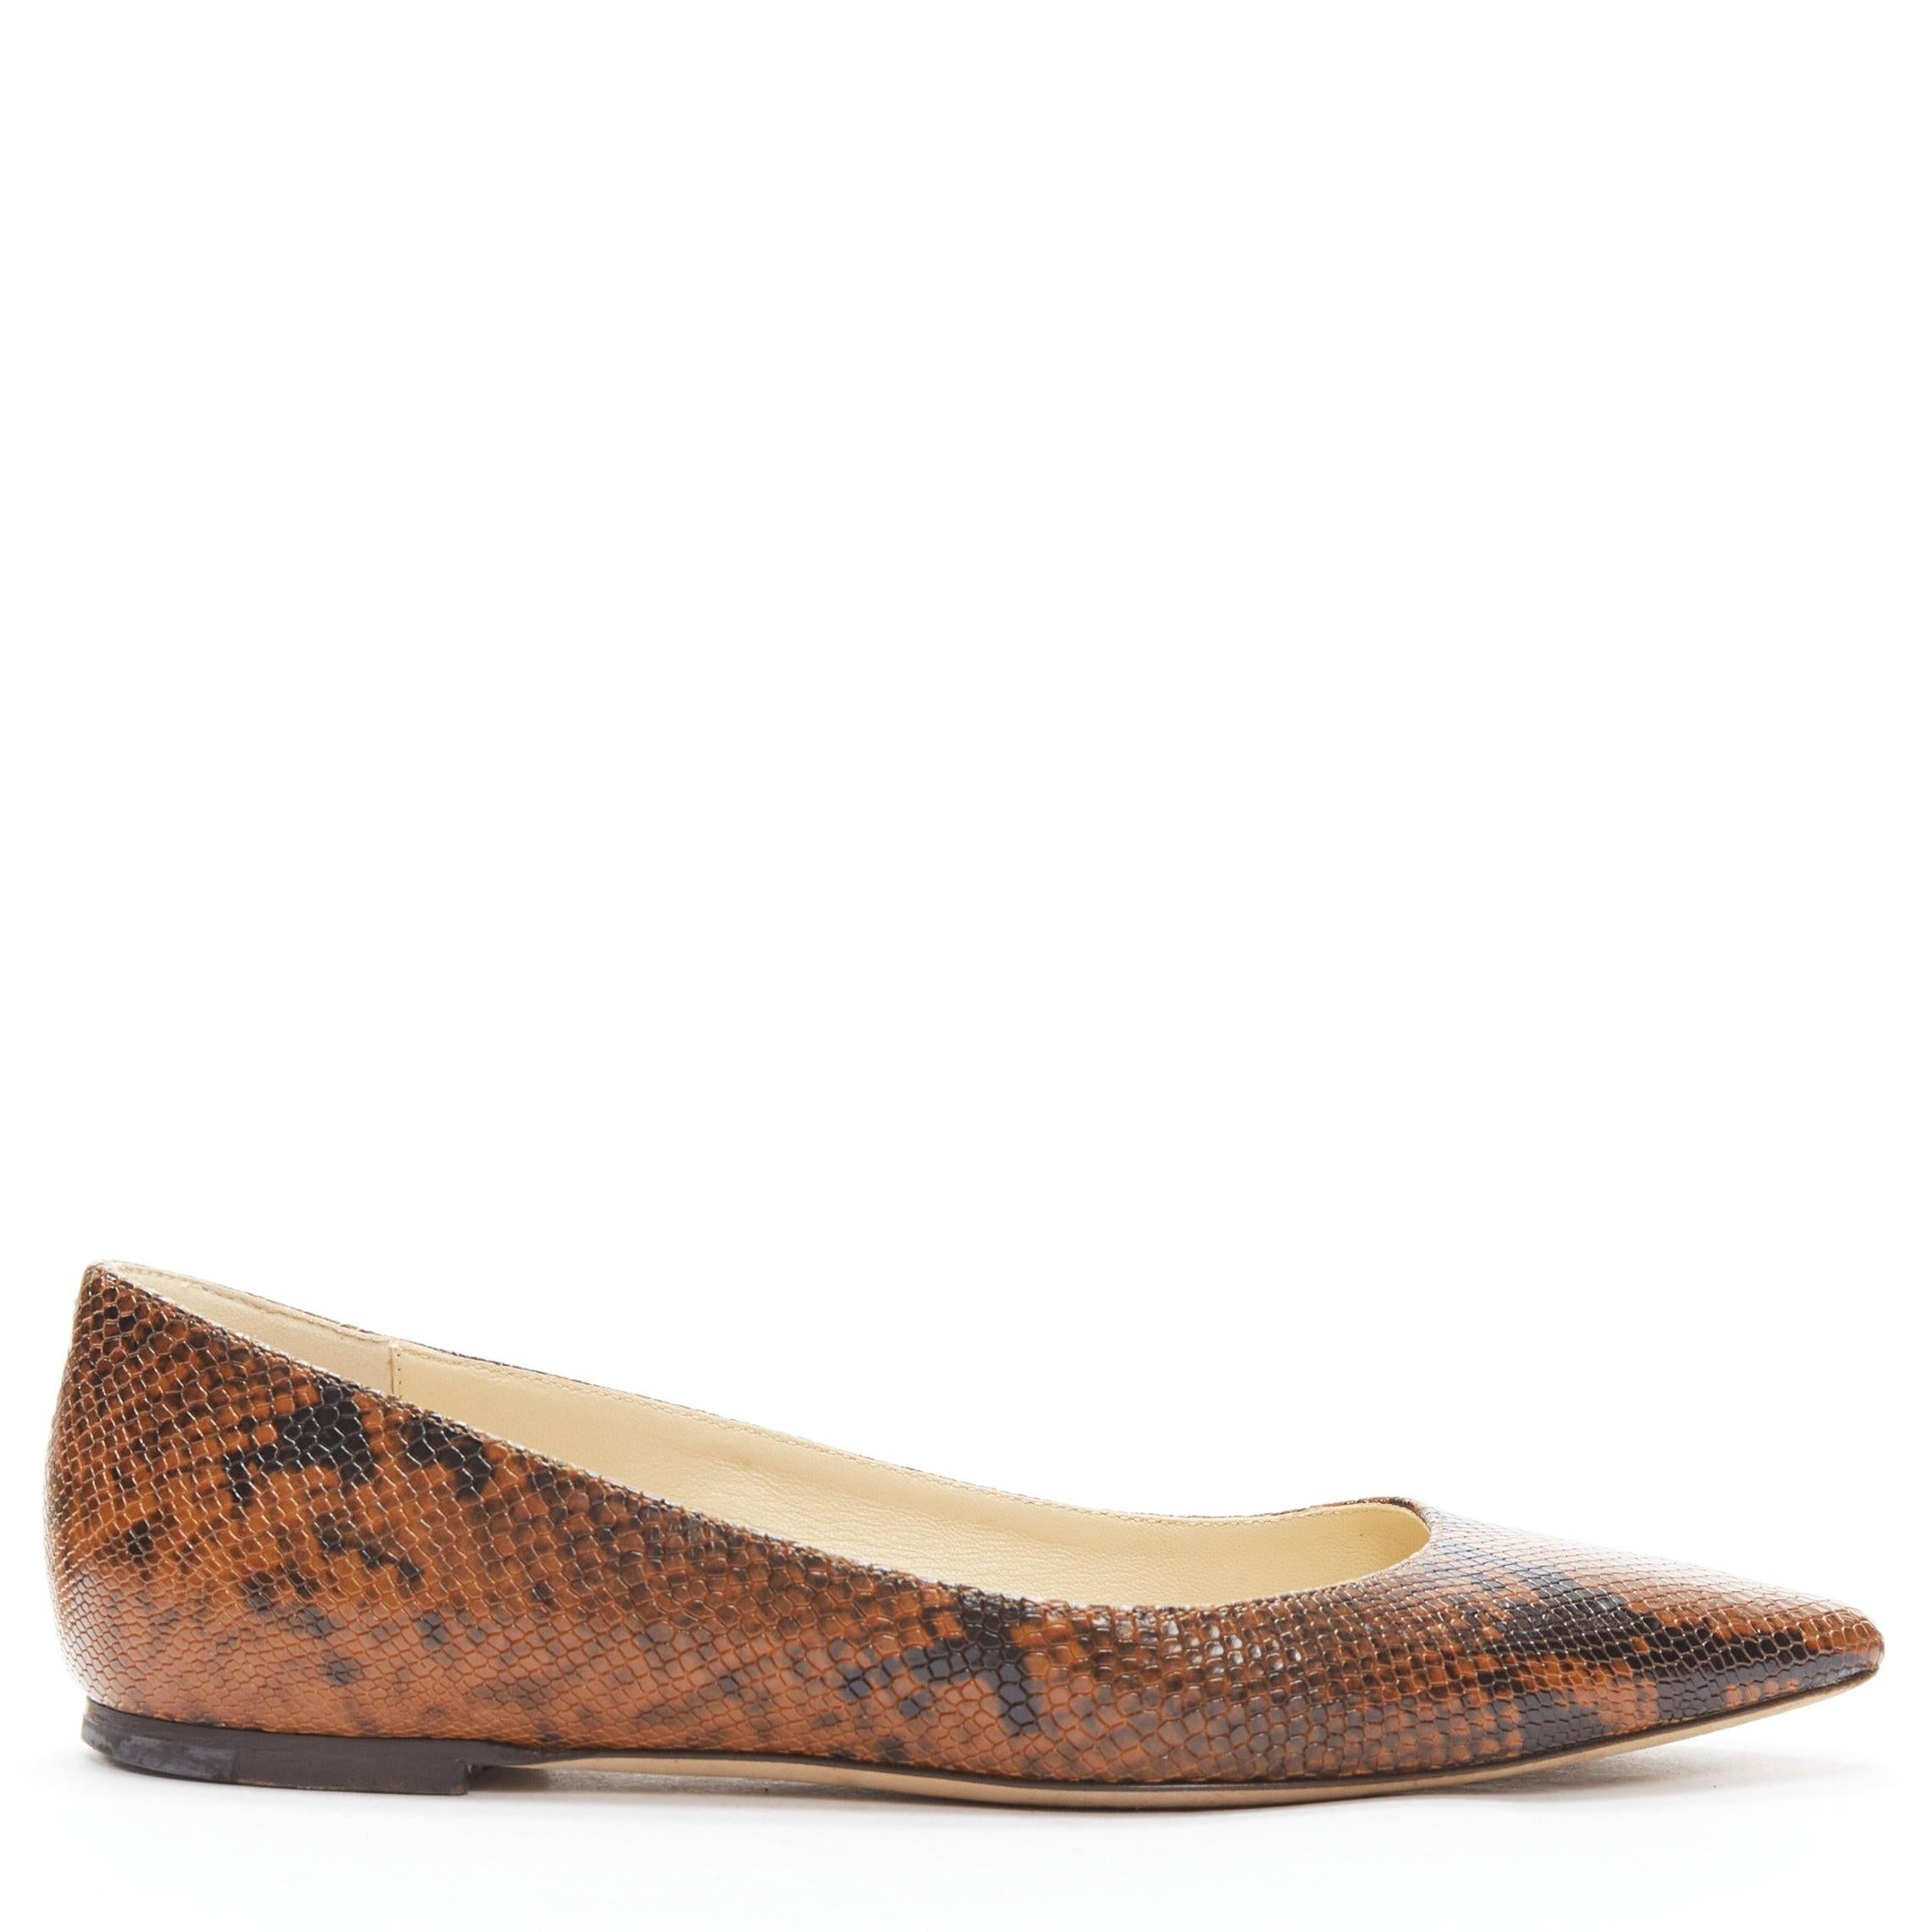 JIMMY CHOO brown embossed scaled leather pointed toe flat shoes EU37
Reference: SNKO/A00369
Brand: Jimmy Choo
Material: Leather
Color: Brown
Pattern: Animal Print
Closure: Slip On
Lining: Nude Leather
Made in: Italy

CONDITION:
Condition: Very good,